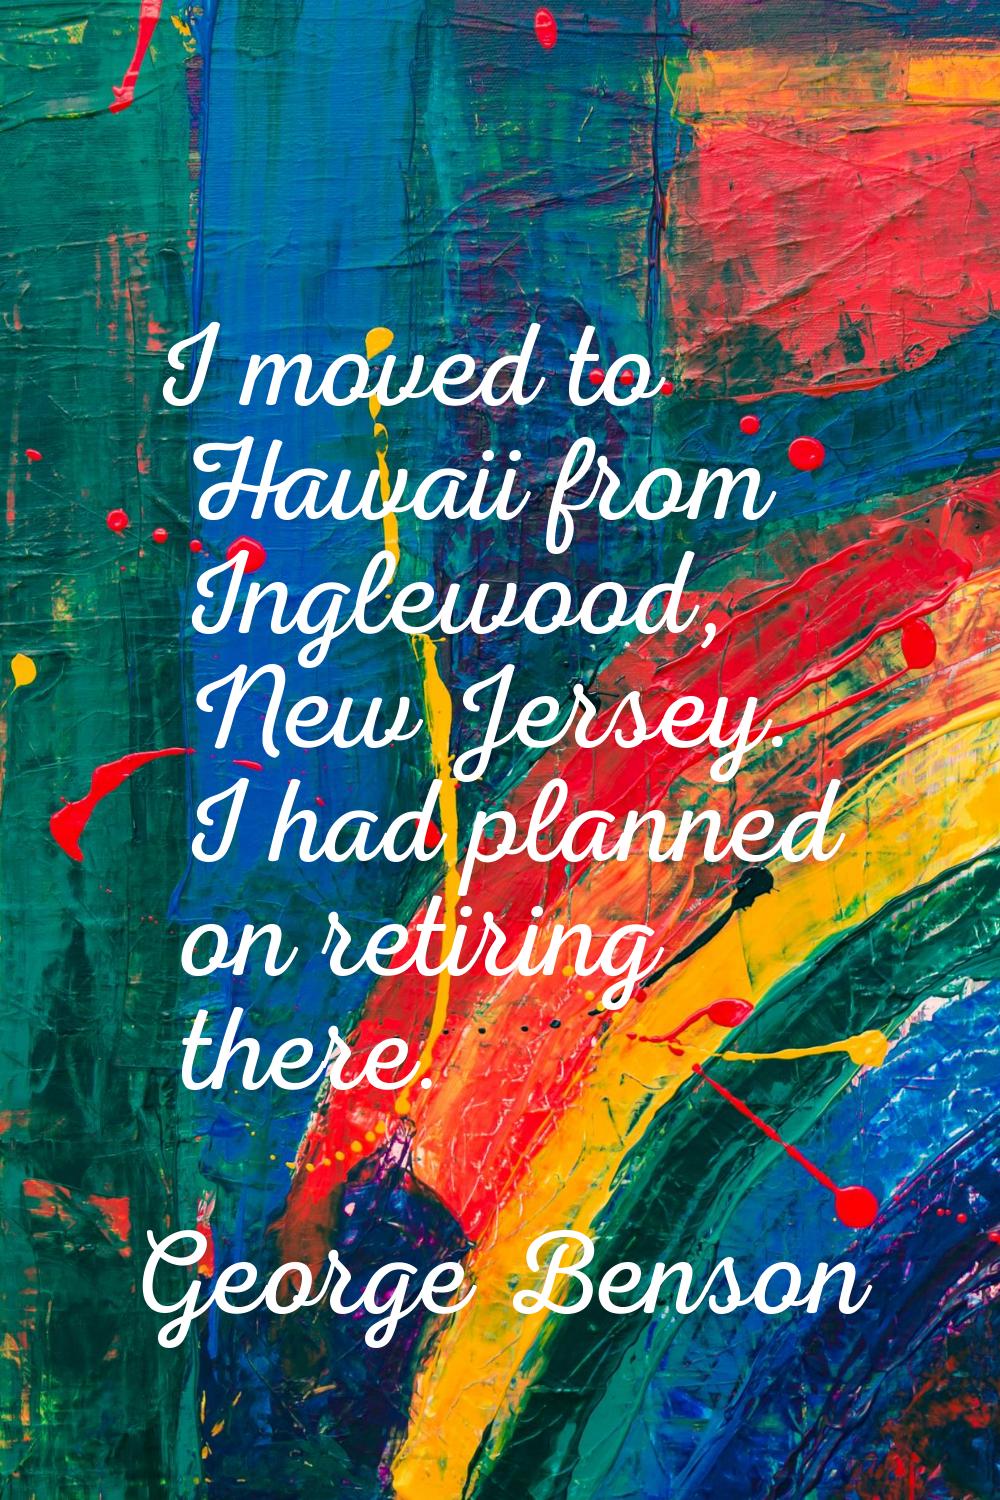 I moved to Hawaii from Inglewood, New Jersey. I had planned on retiring there.